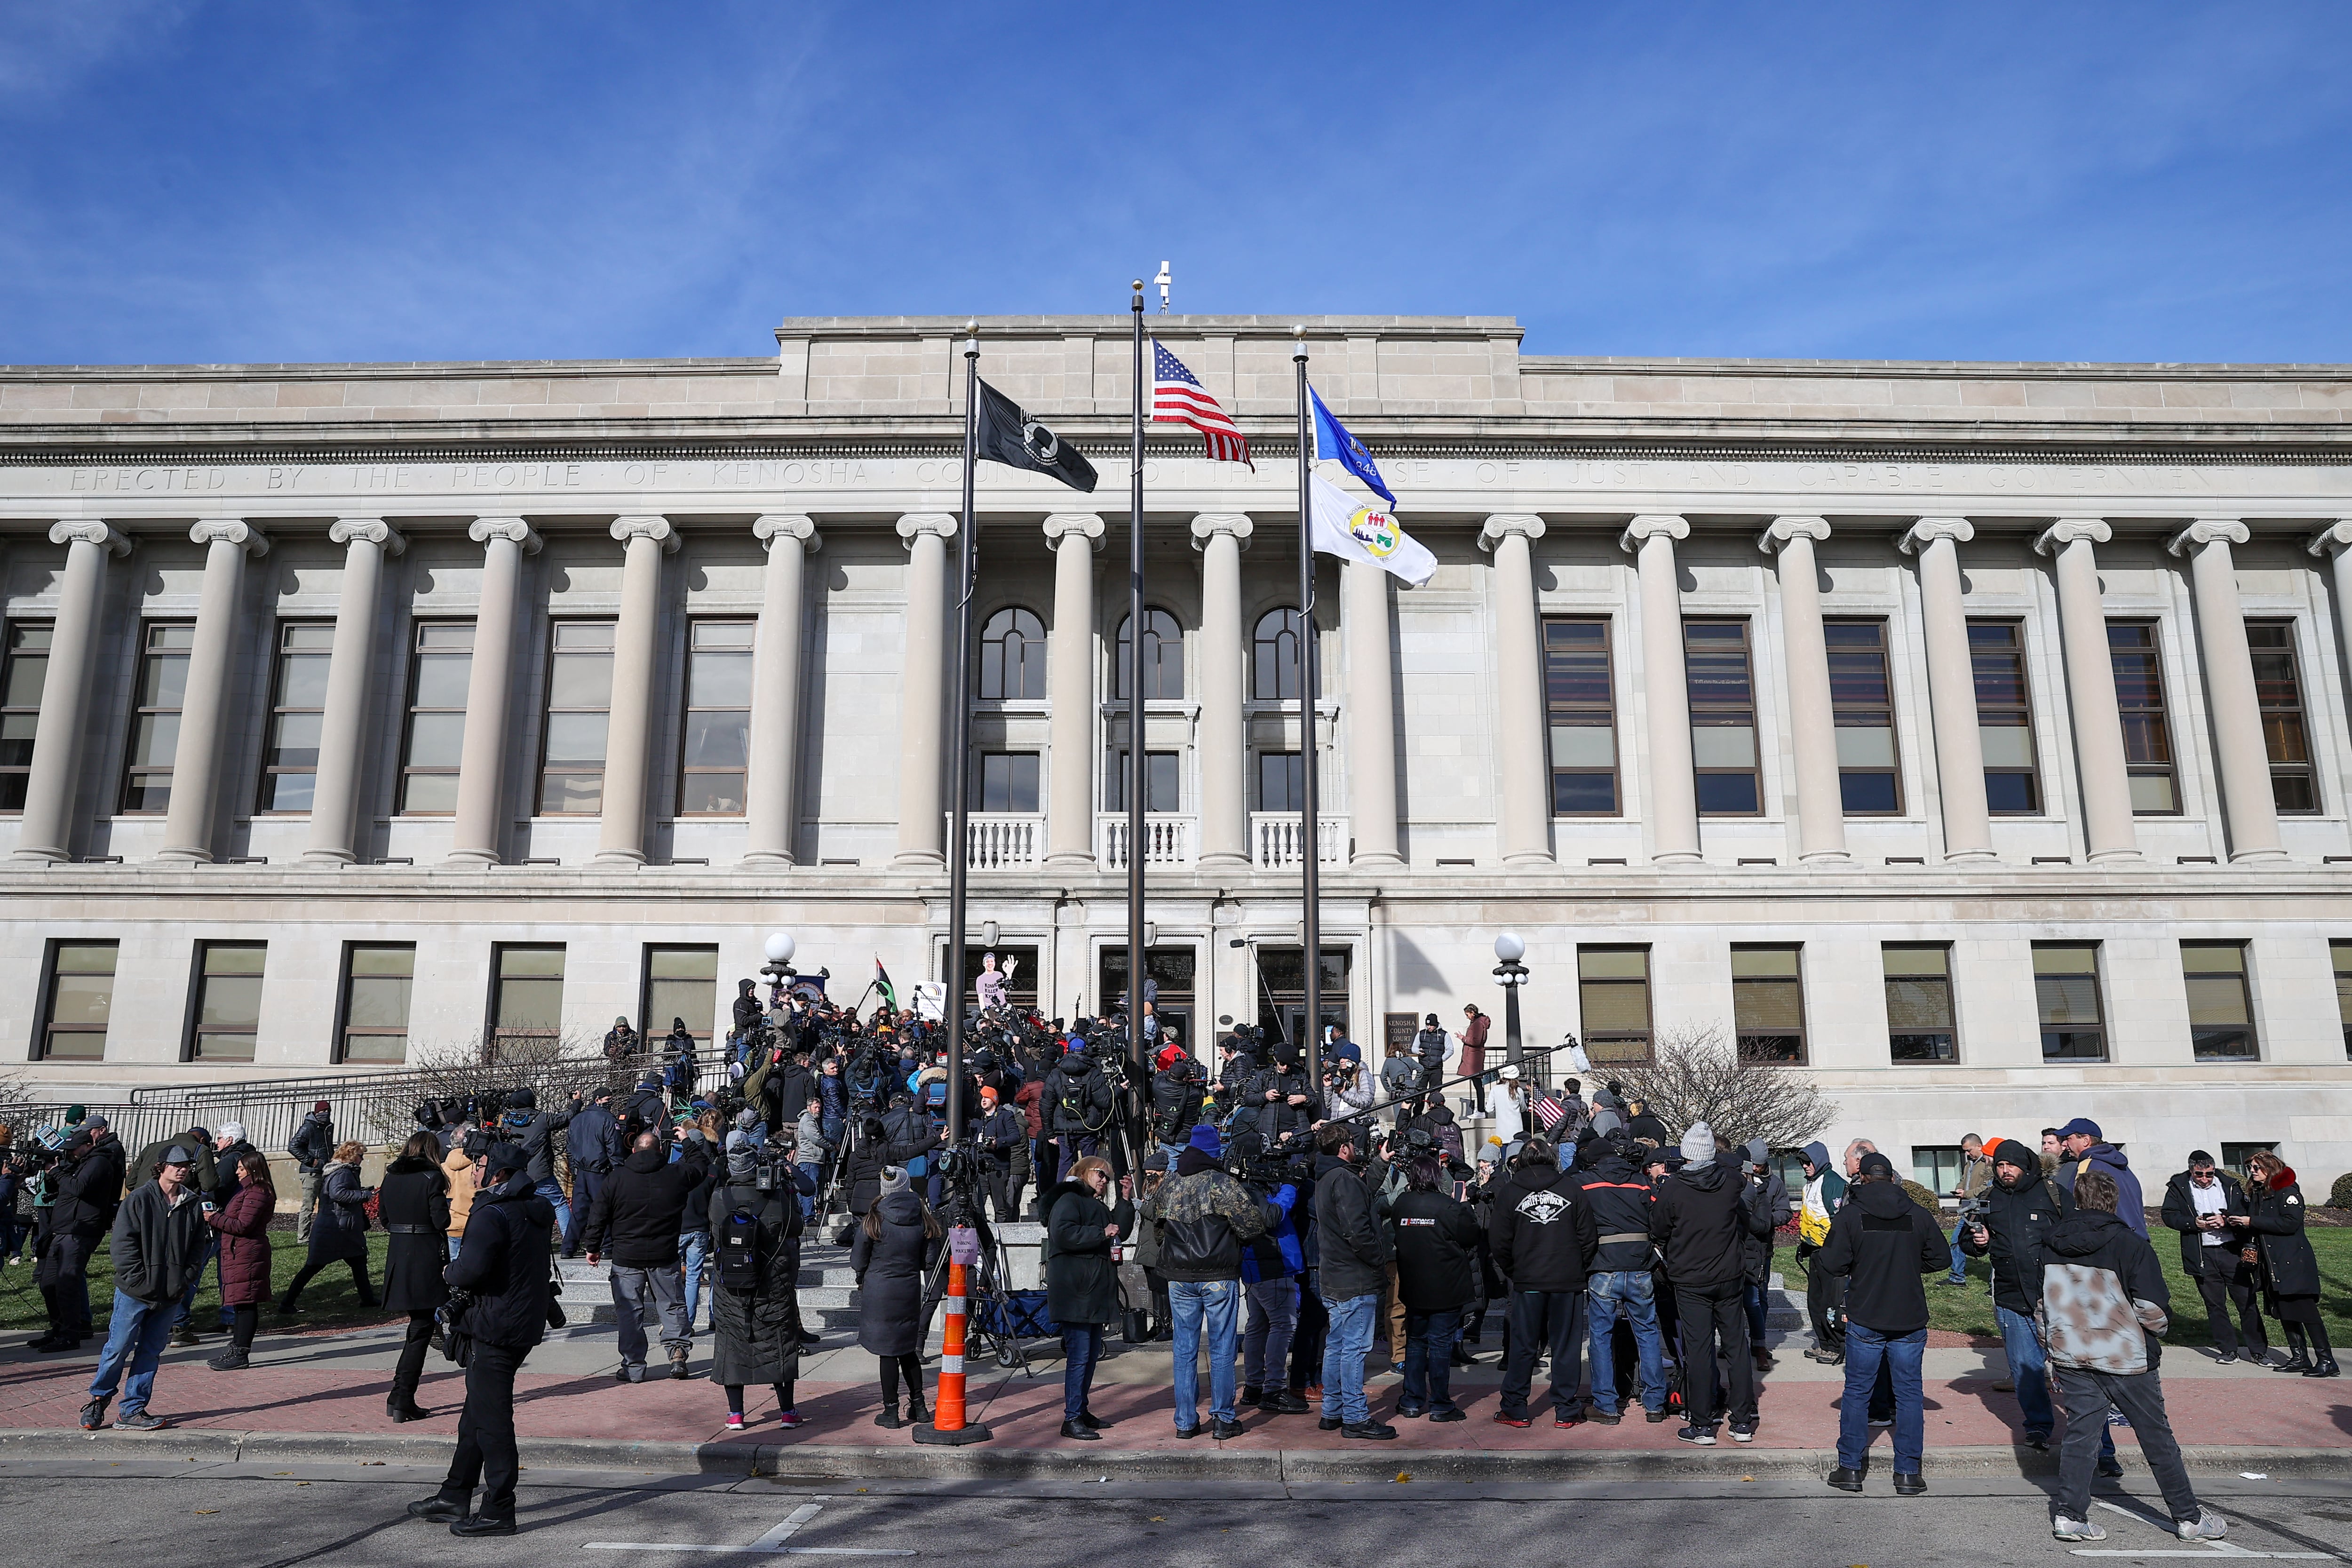 Several people gather on the steps of the Kenosha County Courthouse, a large building with rows of white pillars.